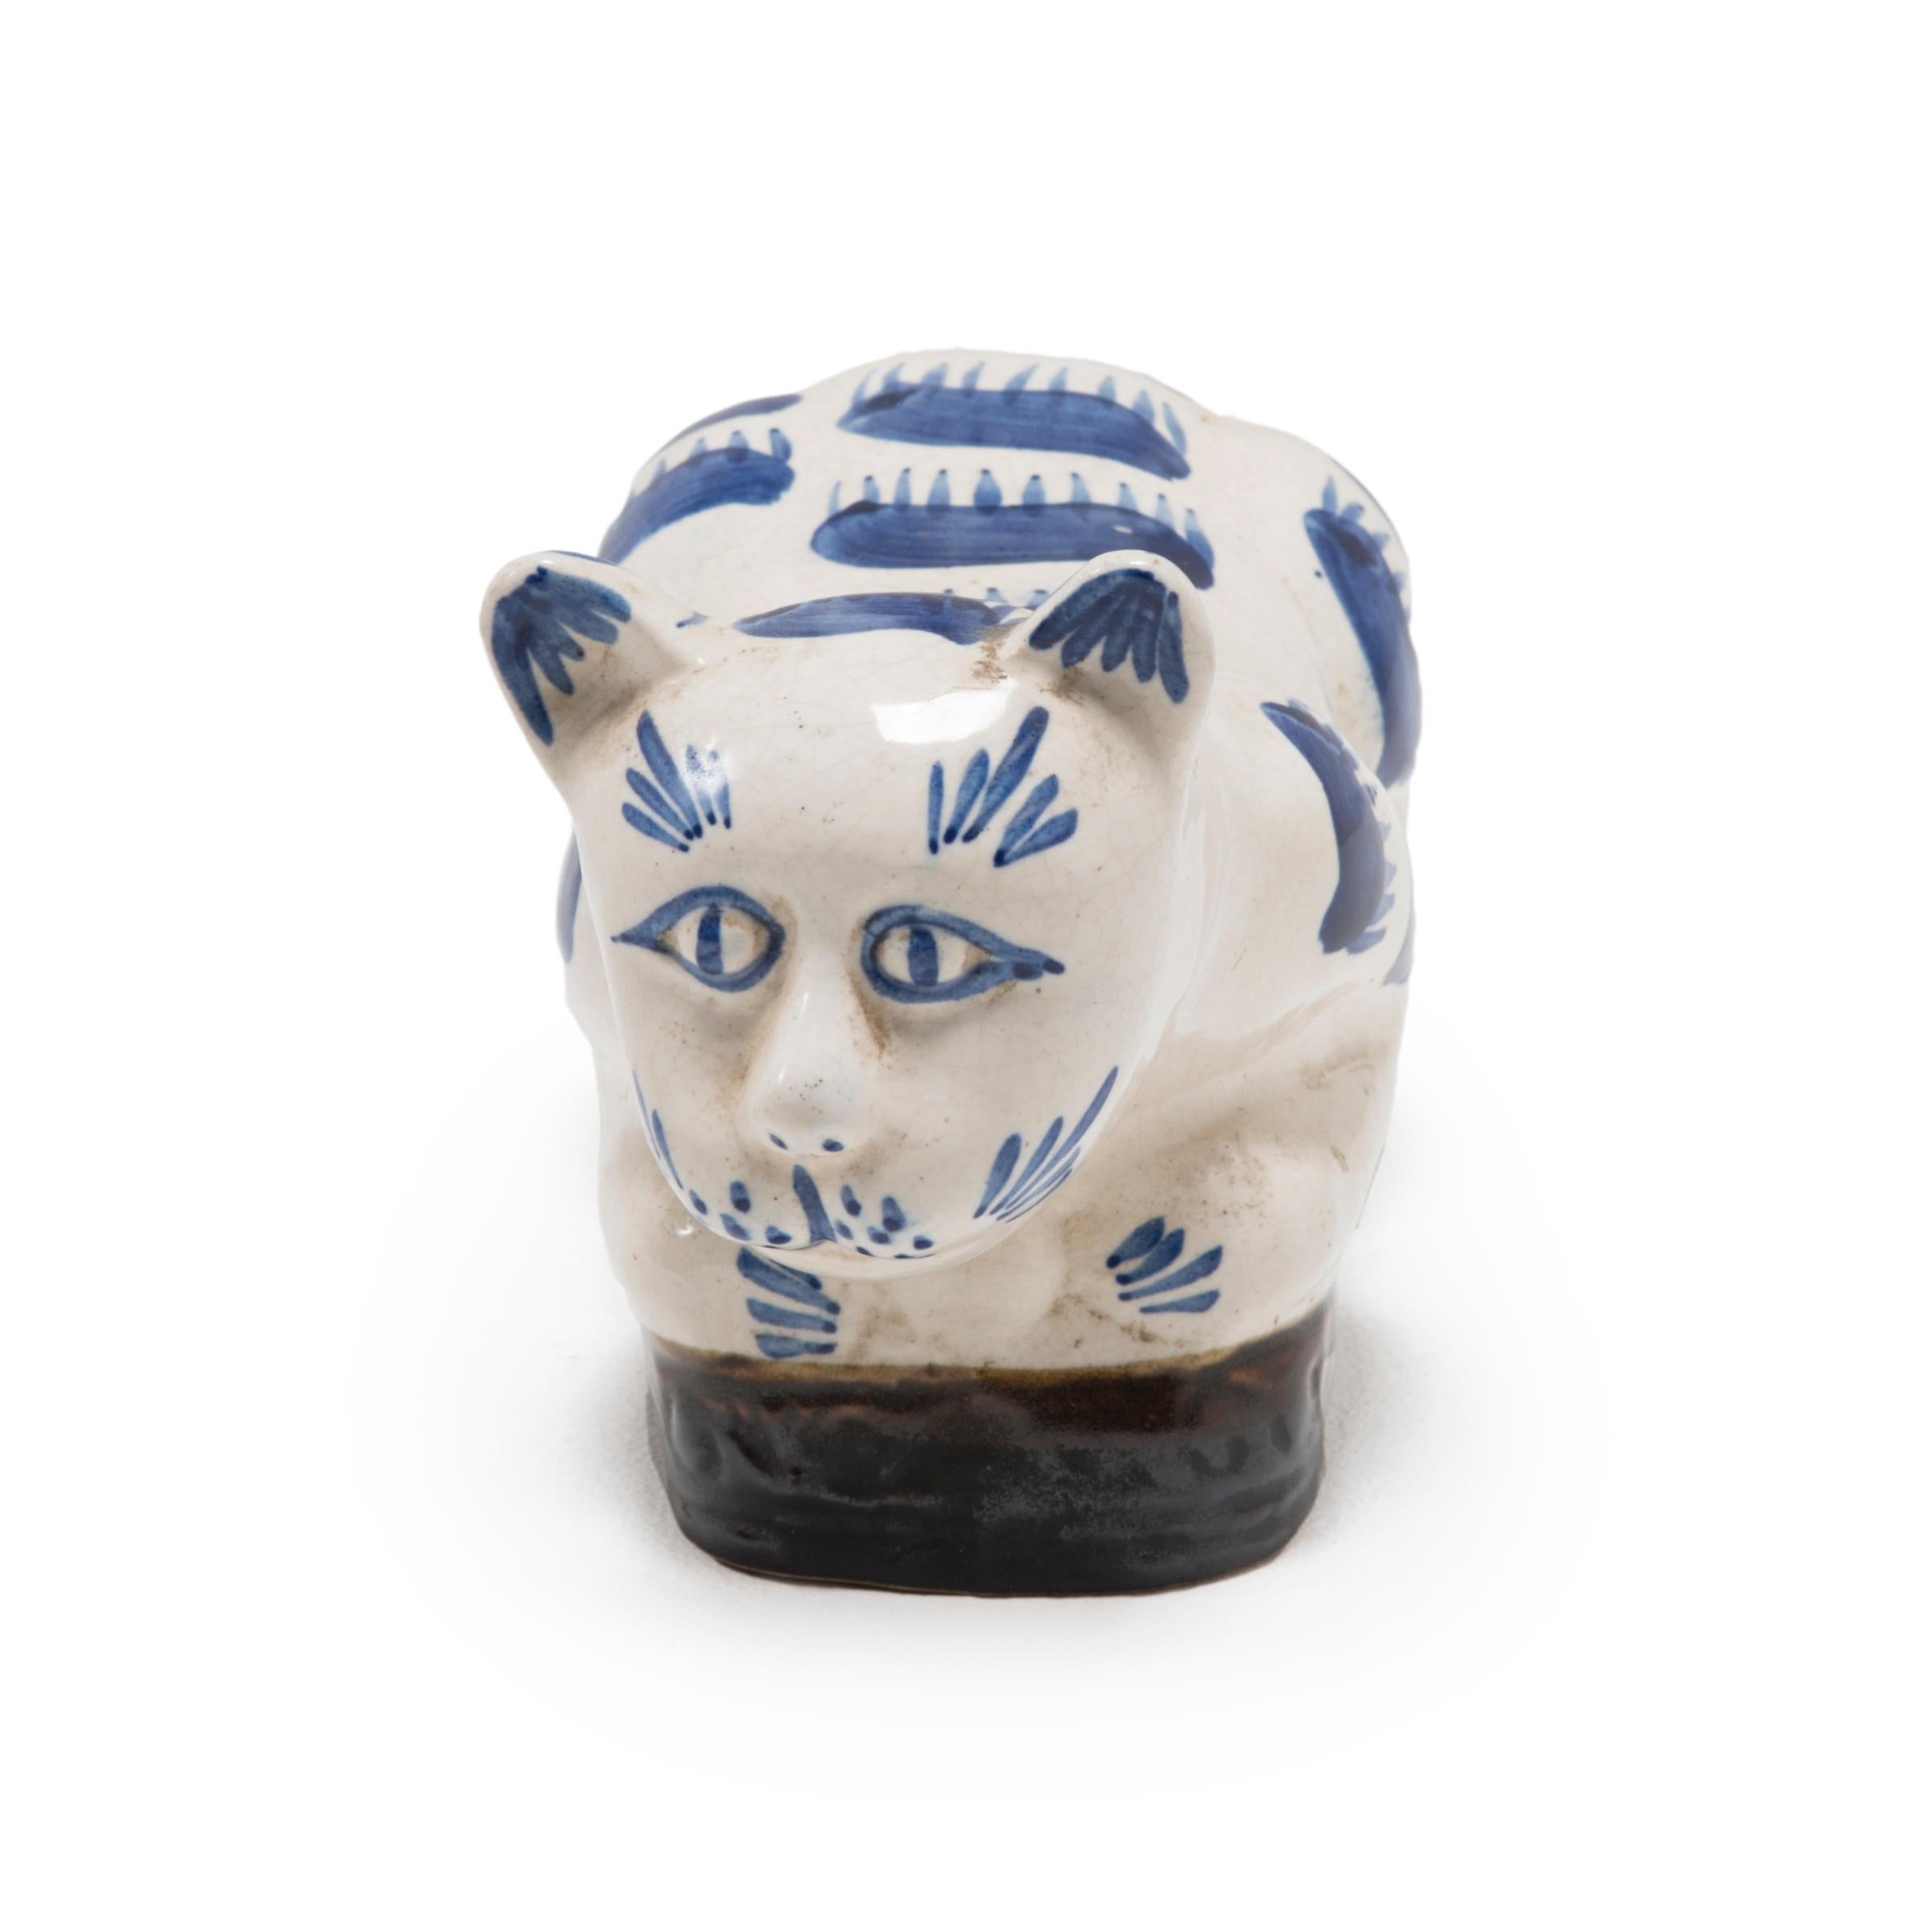 To keep her elaborate hairstyle intact while sleeping, a well-to-do Qing-dynasty woman once used this ceramic headrest as a pillow. The headrest is shaped as a crouching house cat, with whiskers and fur playfully painted in the blue-and-white style.